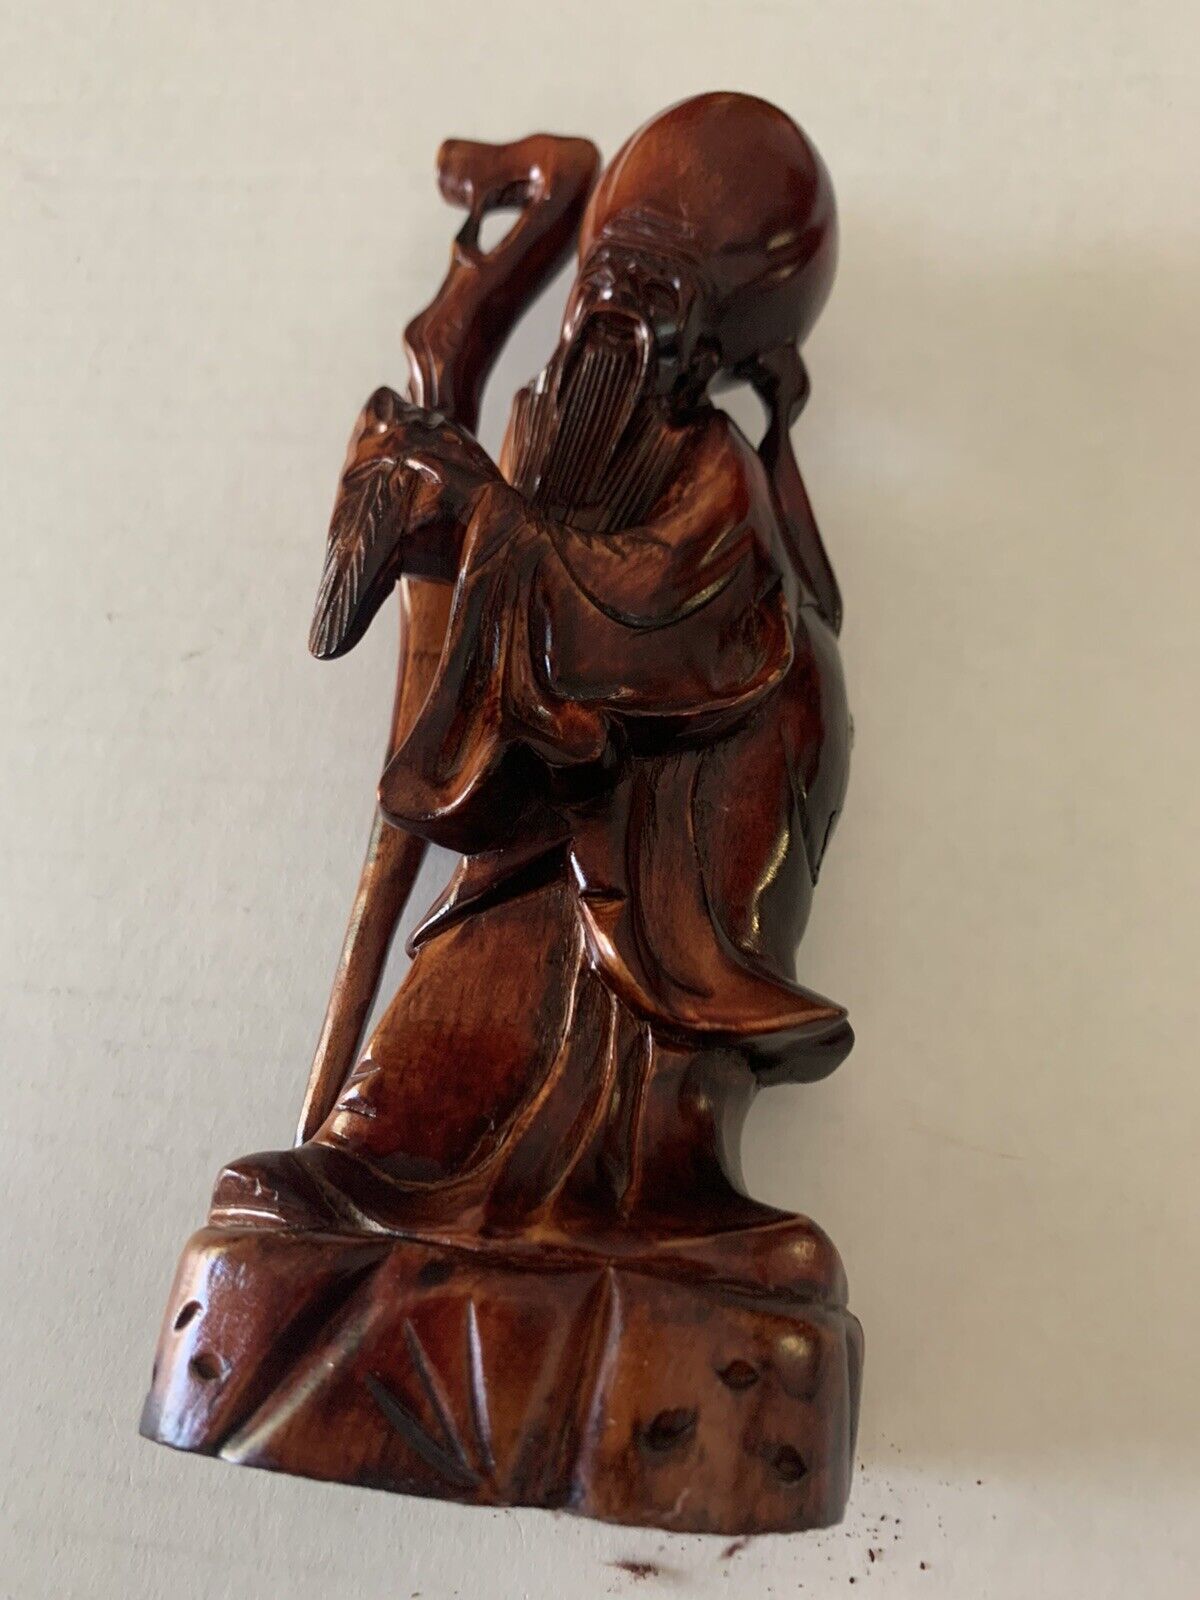 Vintage Chinese Immortal God Of Longevity Shou Lao Hand Carved Wood Statue 7.5”.